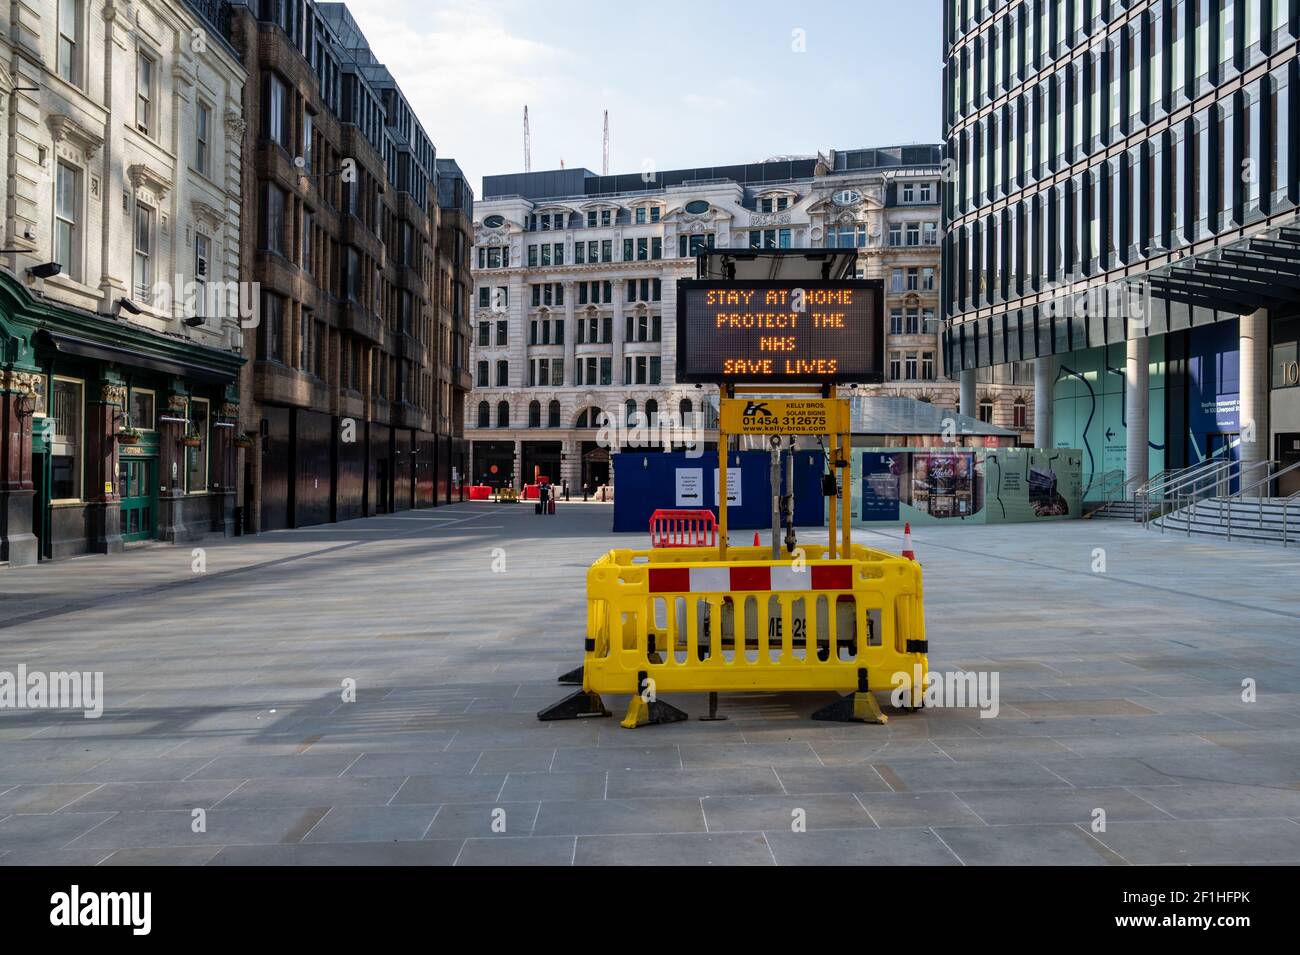 Liverpool Street, London. Covid pandemic, third lockdown. An illuminated display of 'Stay at home, protect NHS, Save Lives' against an empty street. Stock Photo